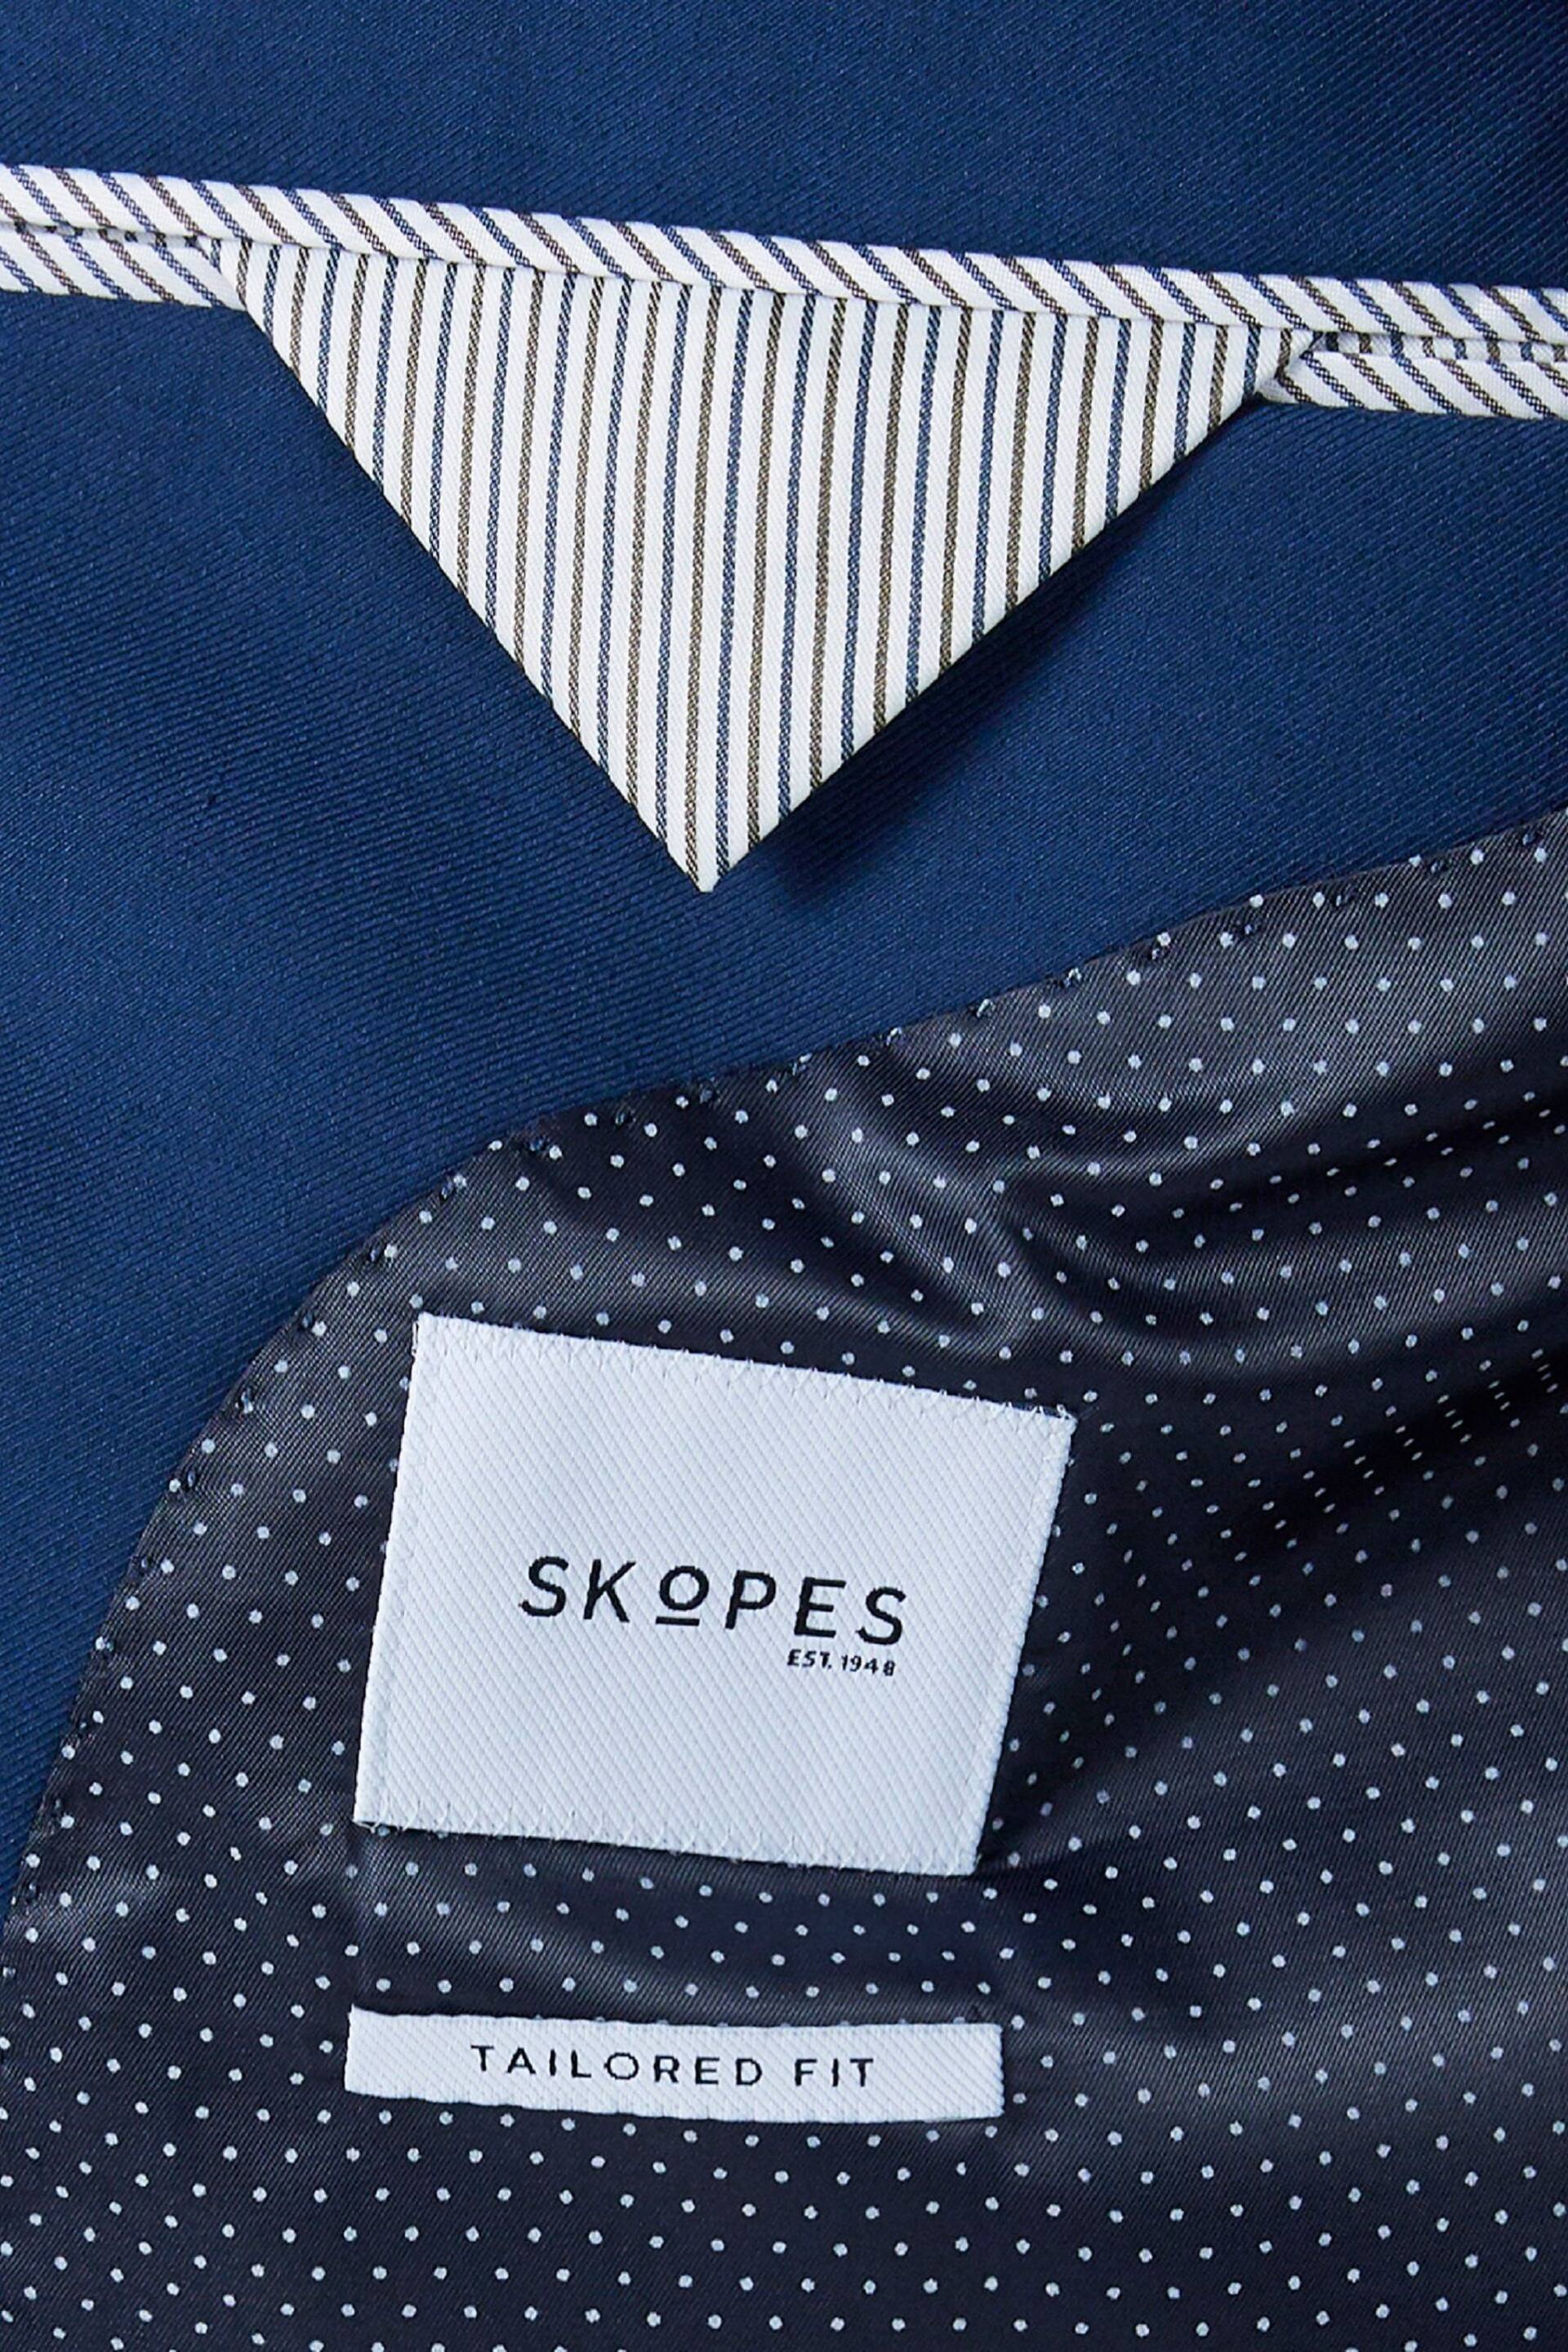 Skopes Kennedy Royal Blue Tailored Fit Suit Jacket - Image 4 of 4